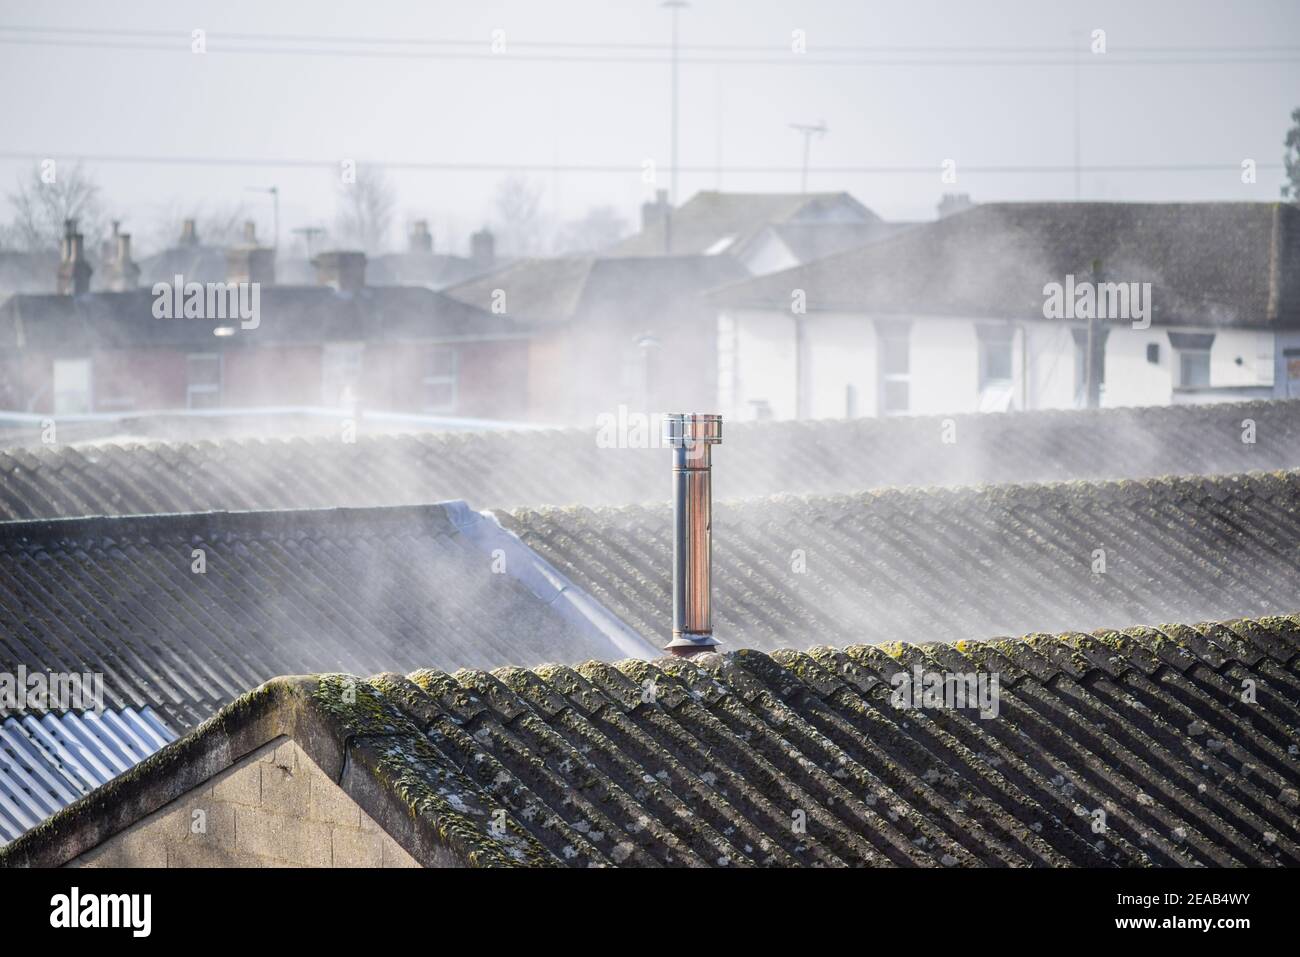 Steaming roofs - evaporation from wet roofs during foggy weather conditions, accelerated by the sun warming up surfaces, Southampton, England, UK Stock Photo